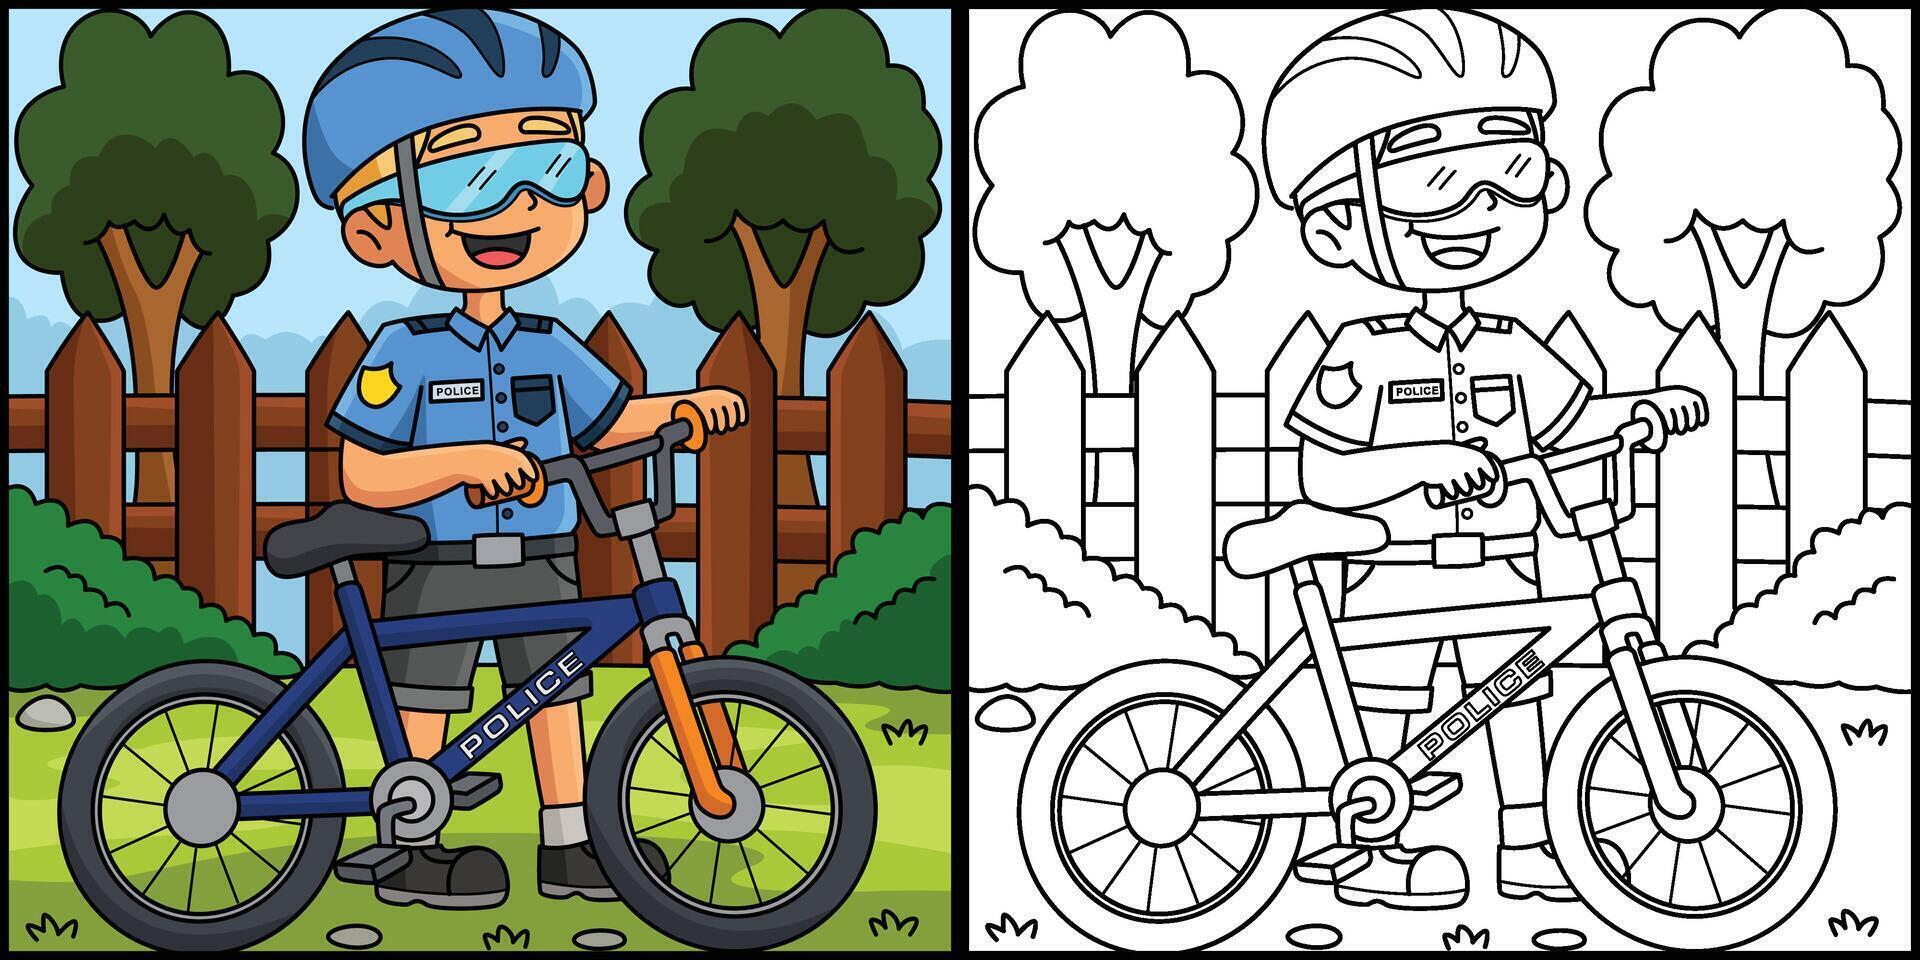 Police Officer with a Bike Coloring Illustration vector